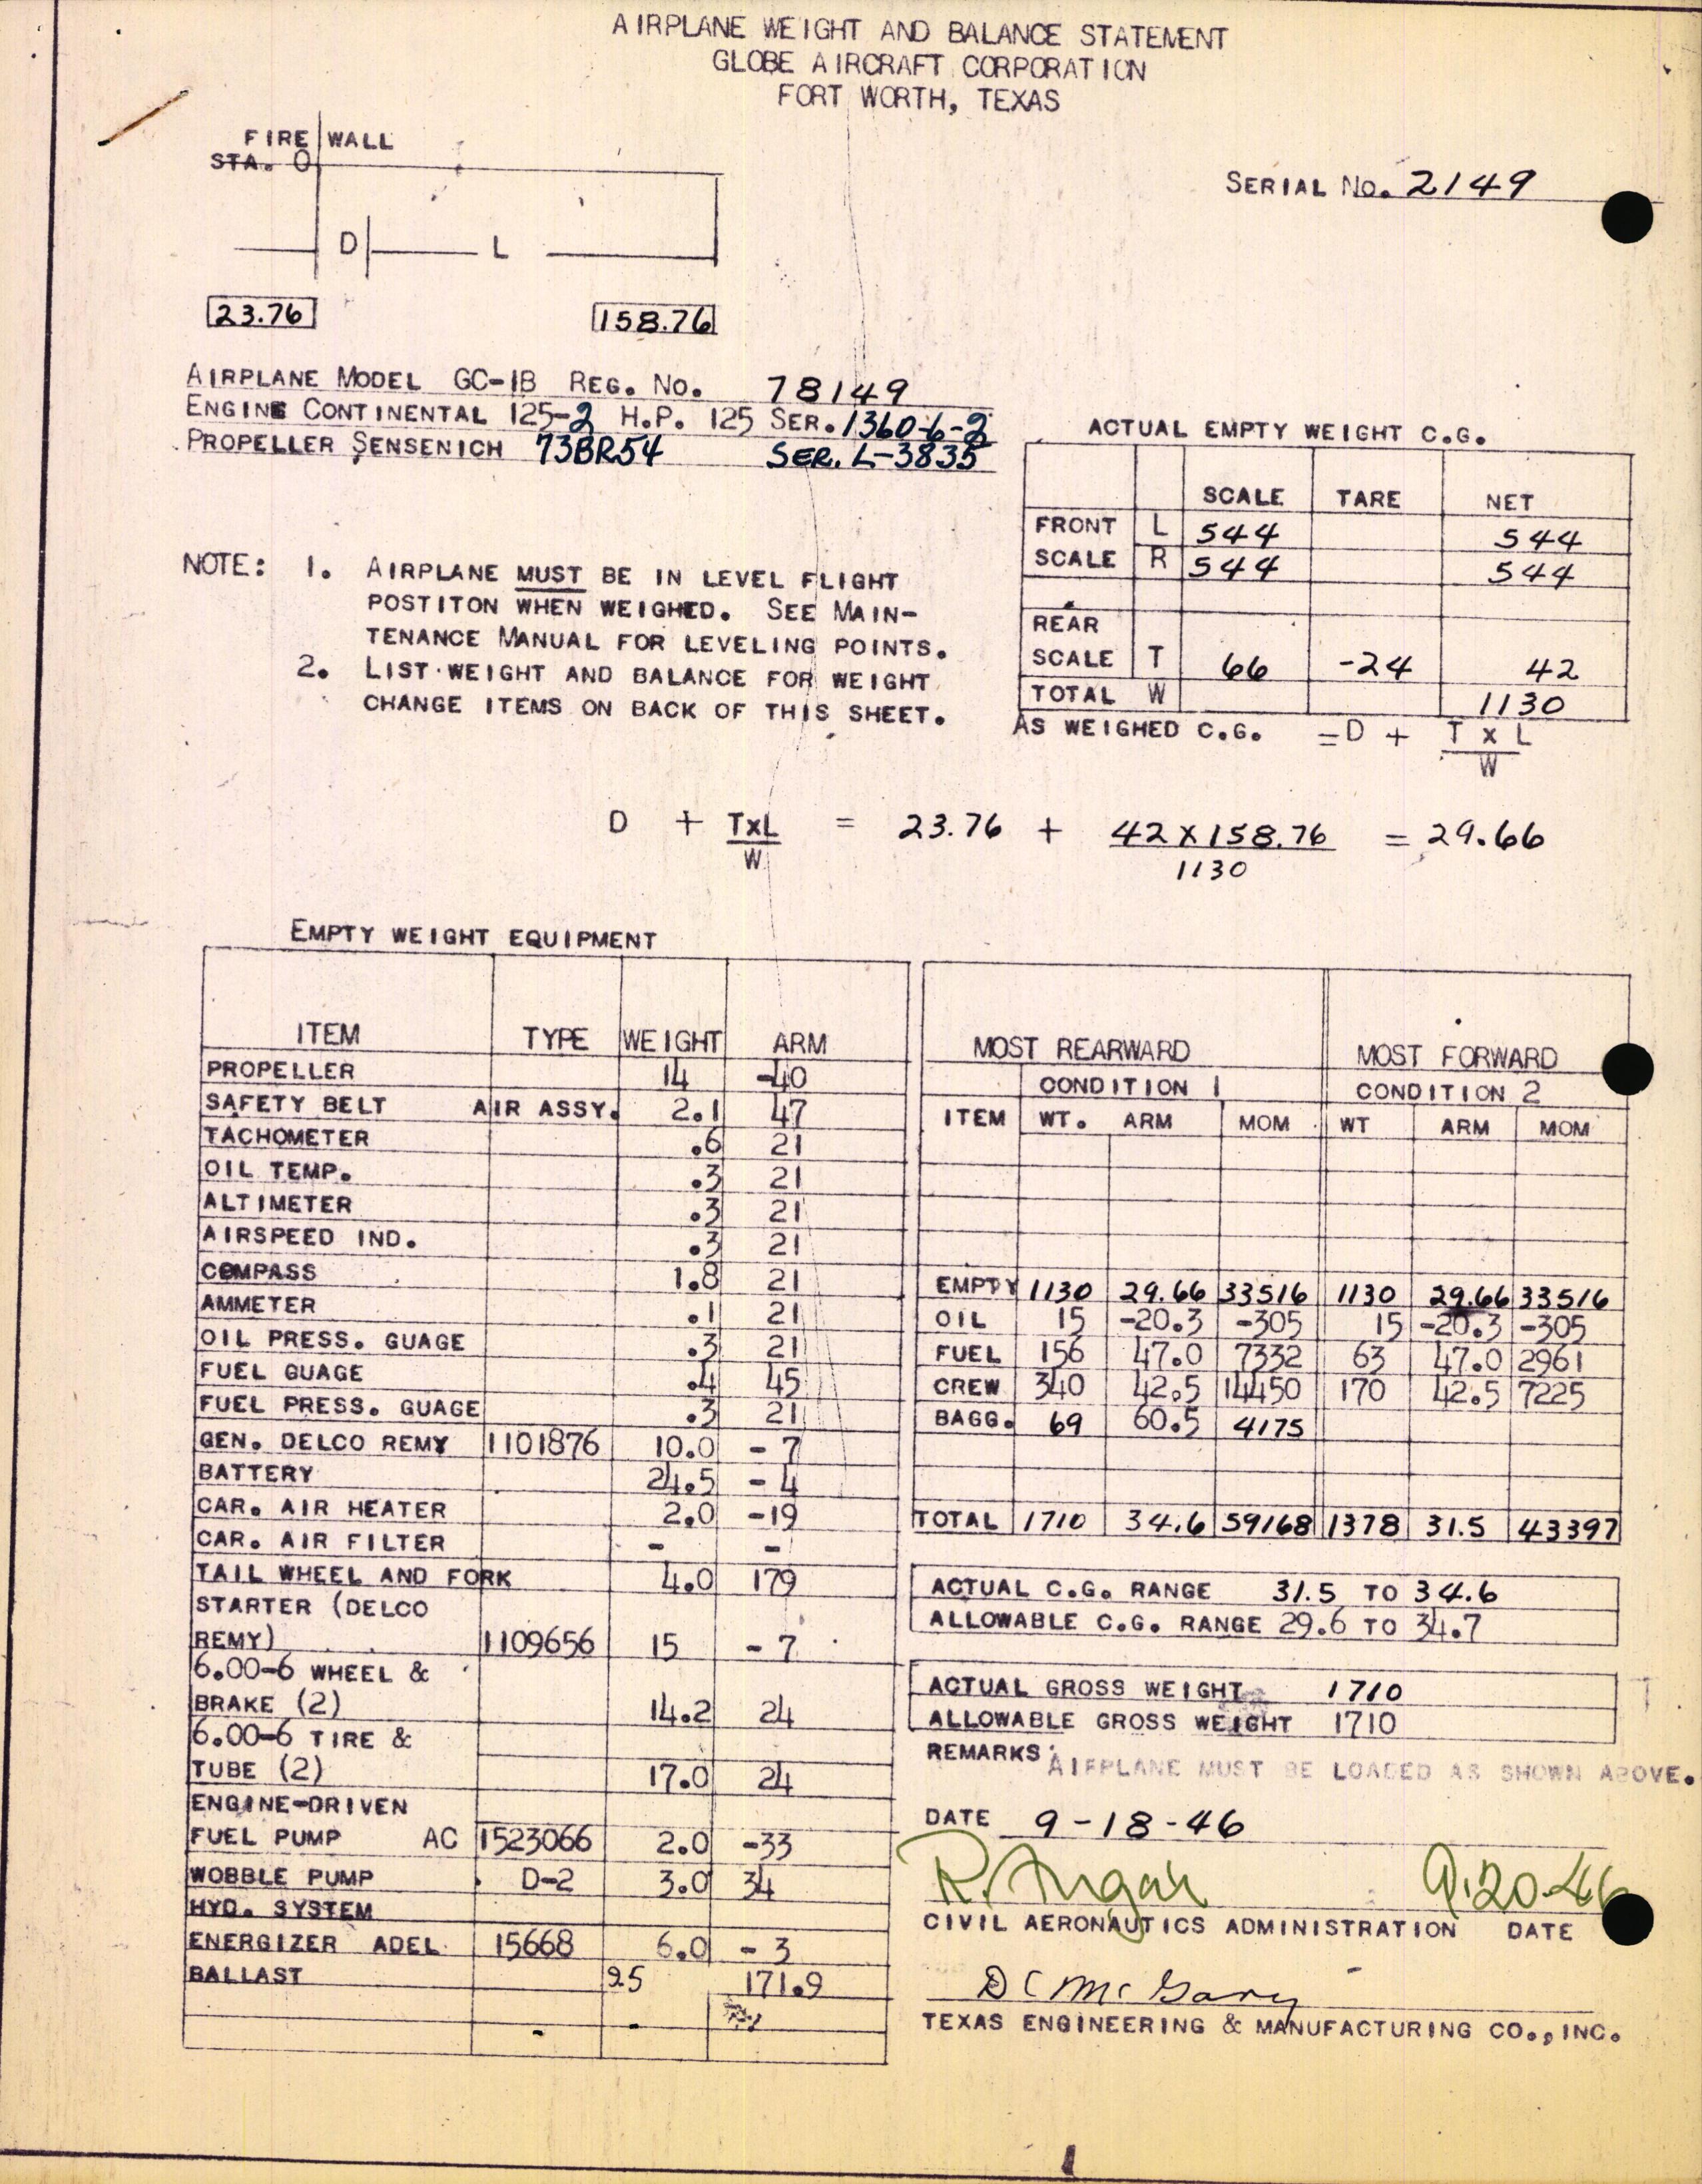 Sample page 3 from AirCorps Library document: Technical Information for Serial Number 2149